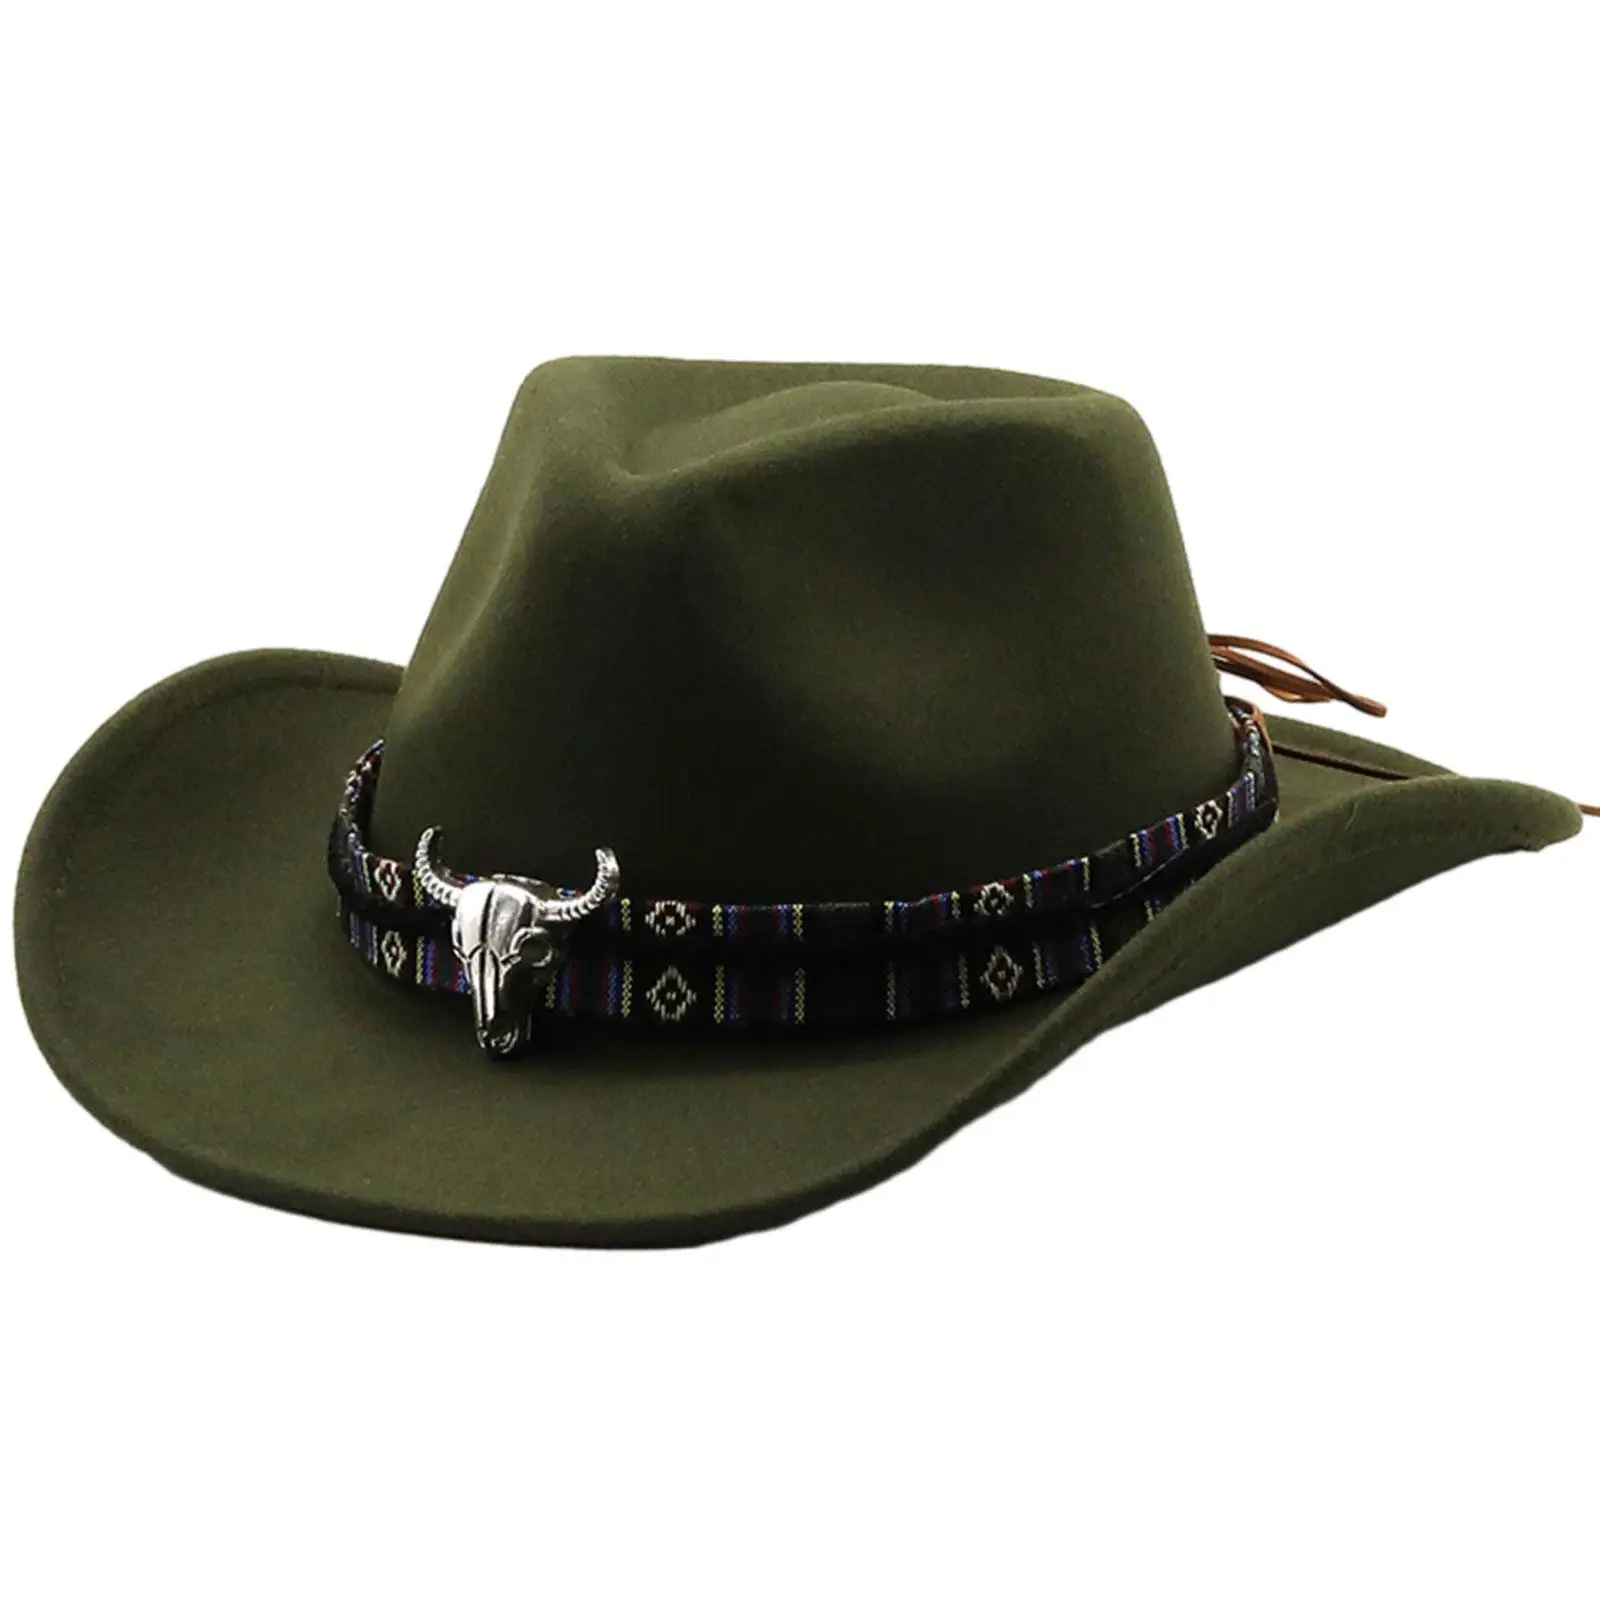  Hat Men Outdoor Hat Fashion Warm Casual Cowgirl Hat Sun Protection Hat for Travel Themed Party Hiking